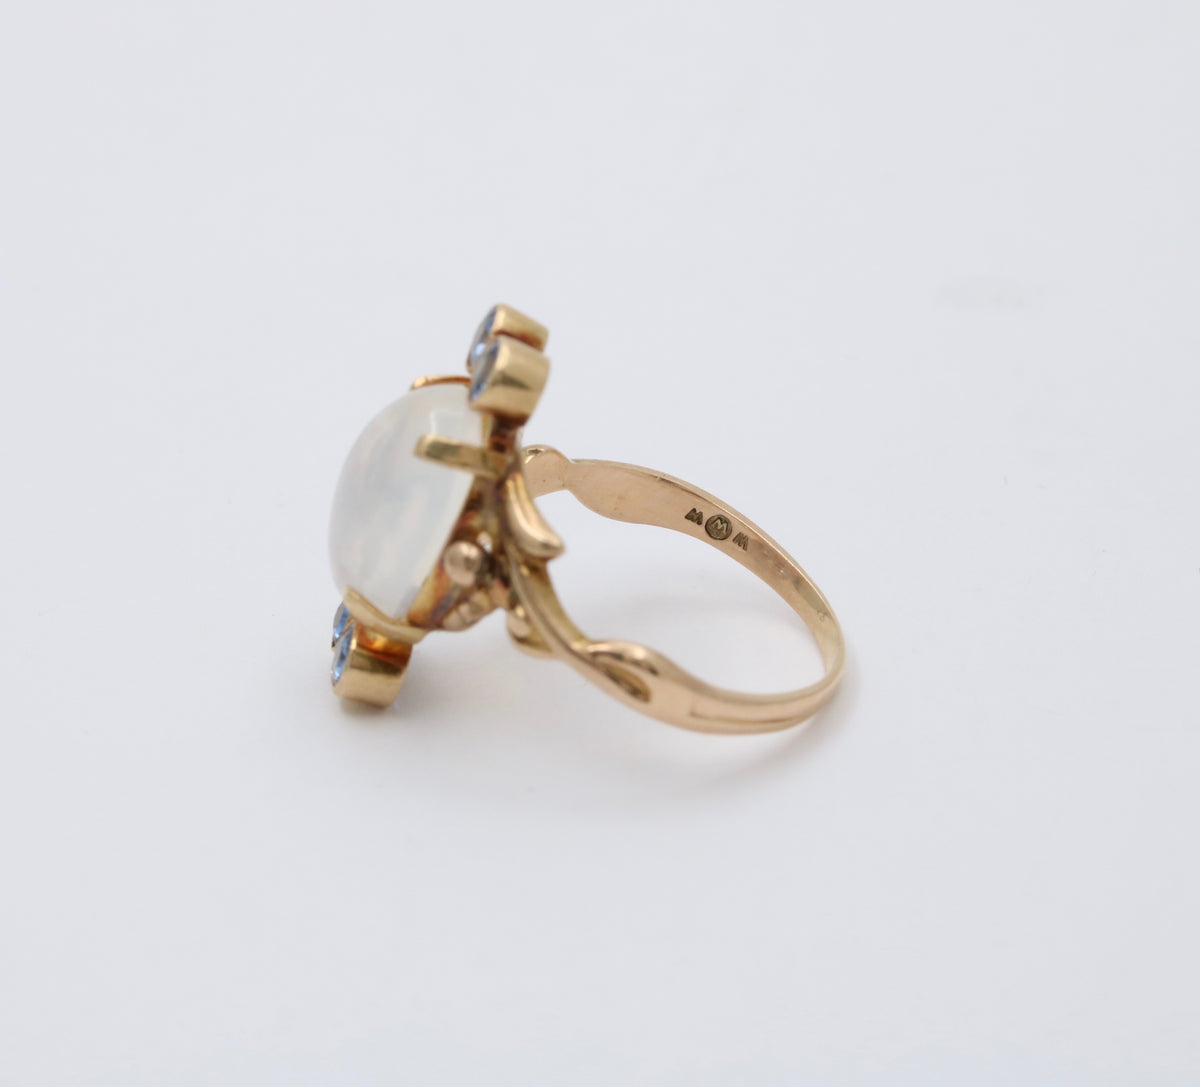 Vintage Moonstone and Sapphire 14K Gold Ring